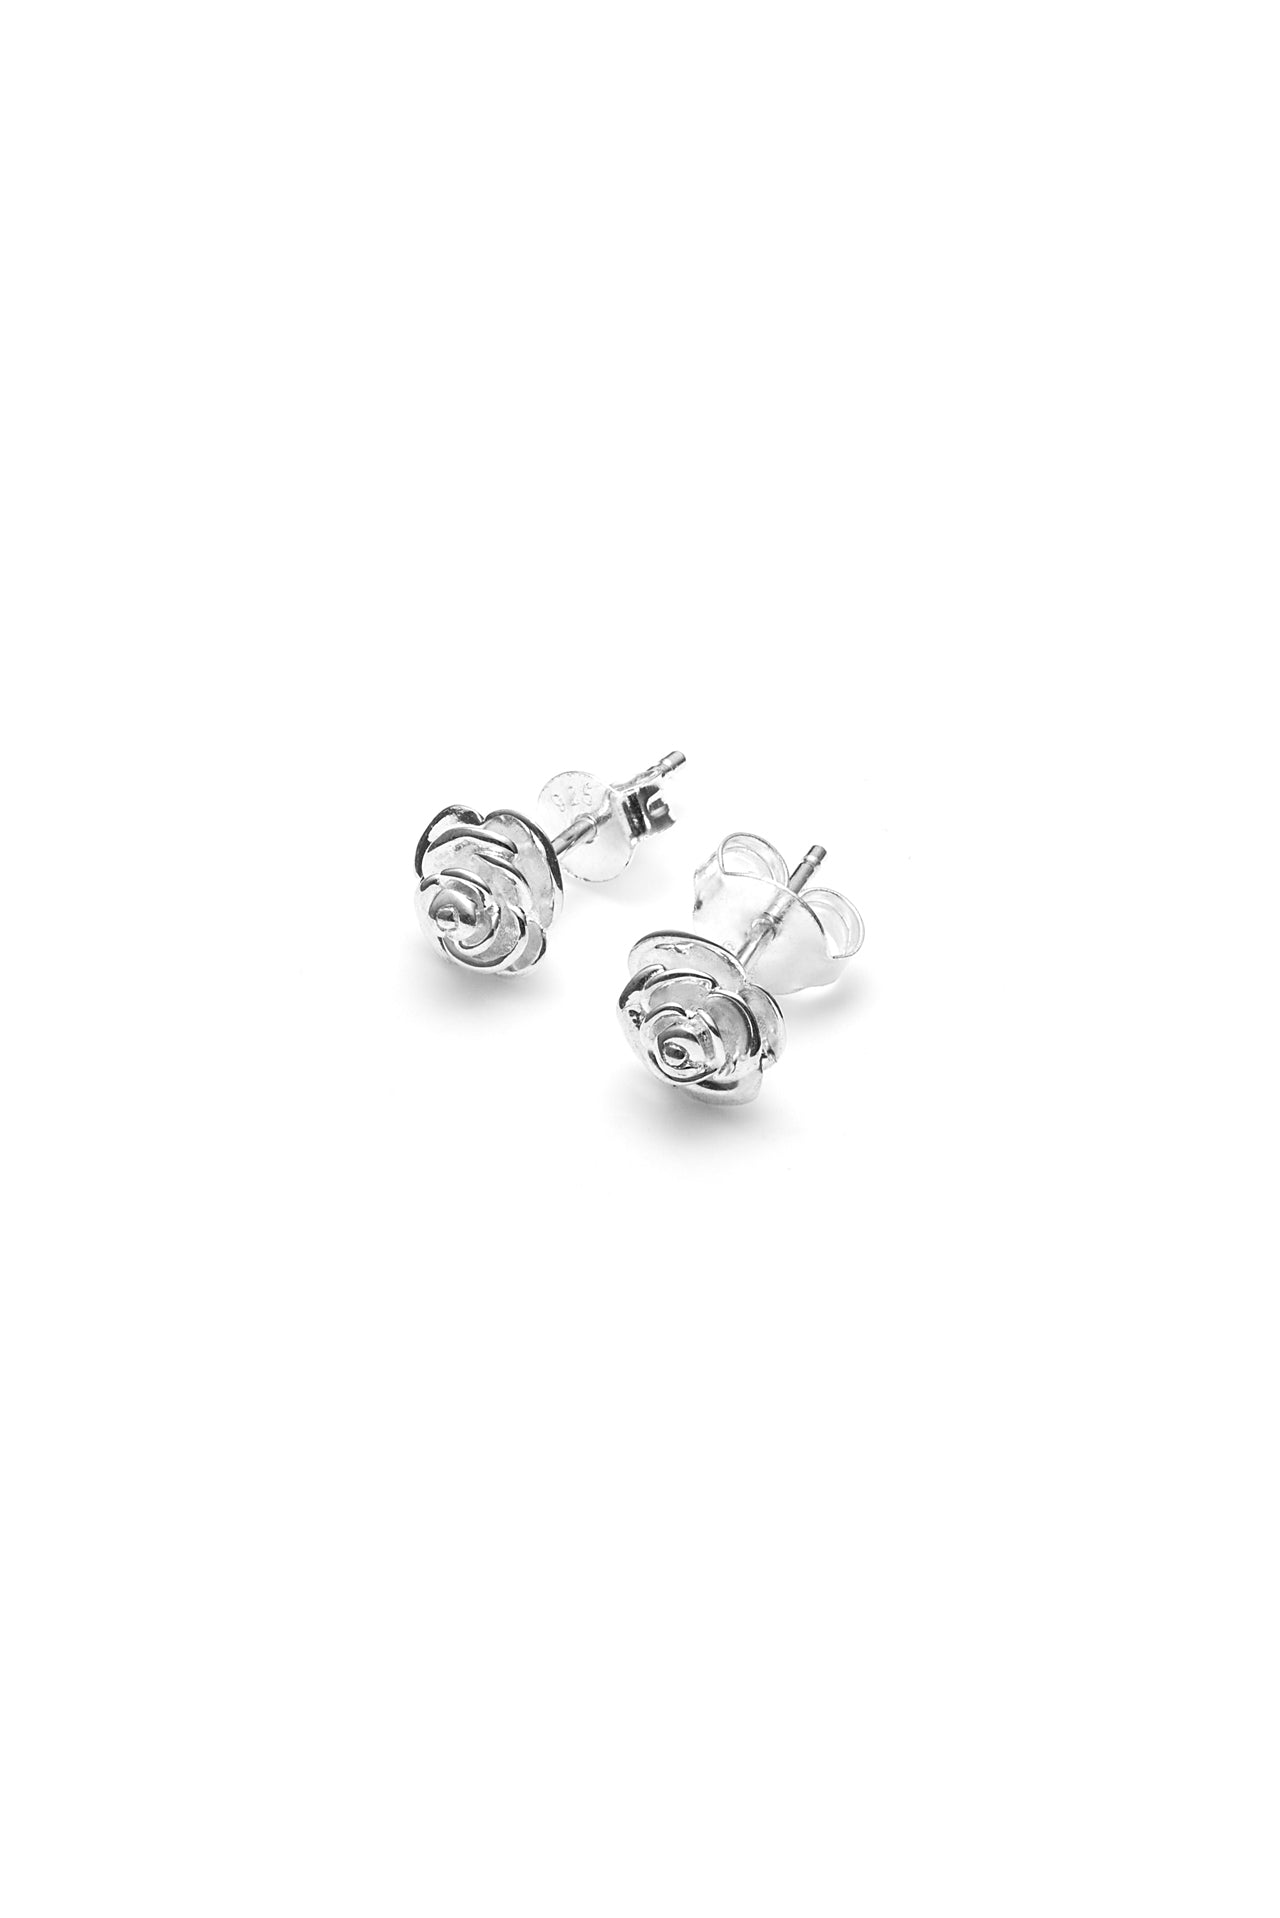 STOLEN GIRLFRIENDS CLUB ROSE BUD EARRINGS    The Stolen Girlfriends Club Bow Earrings are cute mini rose buds, these little roses are great for every day wear. Crafted using sterling silver, pair with other studs, match with Stolen's sleeper version of this stud or wear alone.      Sold as a pair     High polish sterling silver     Available in; Silver     Comes in a 'Stolen Girlfriends Club' jewellery box